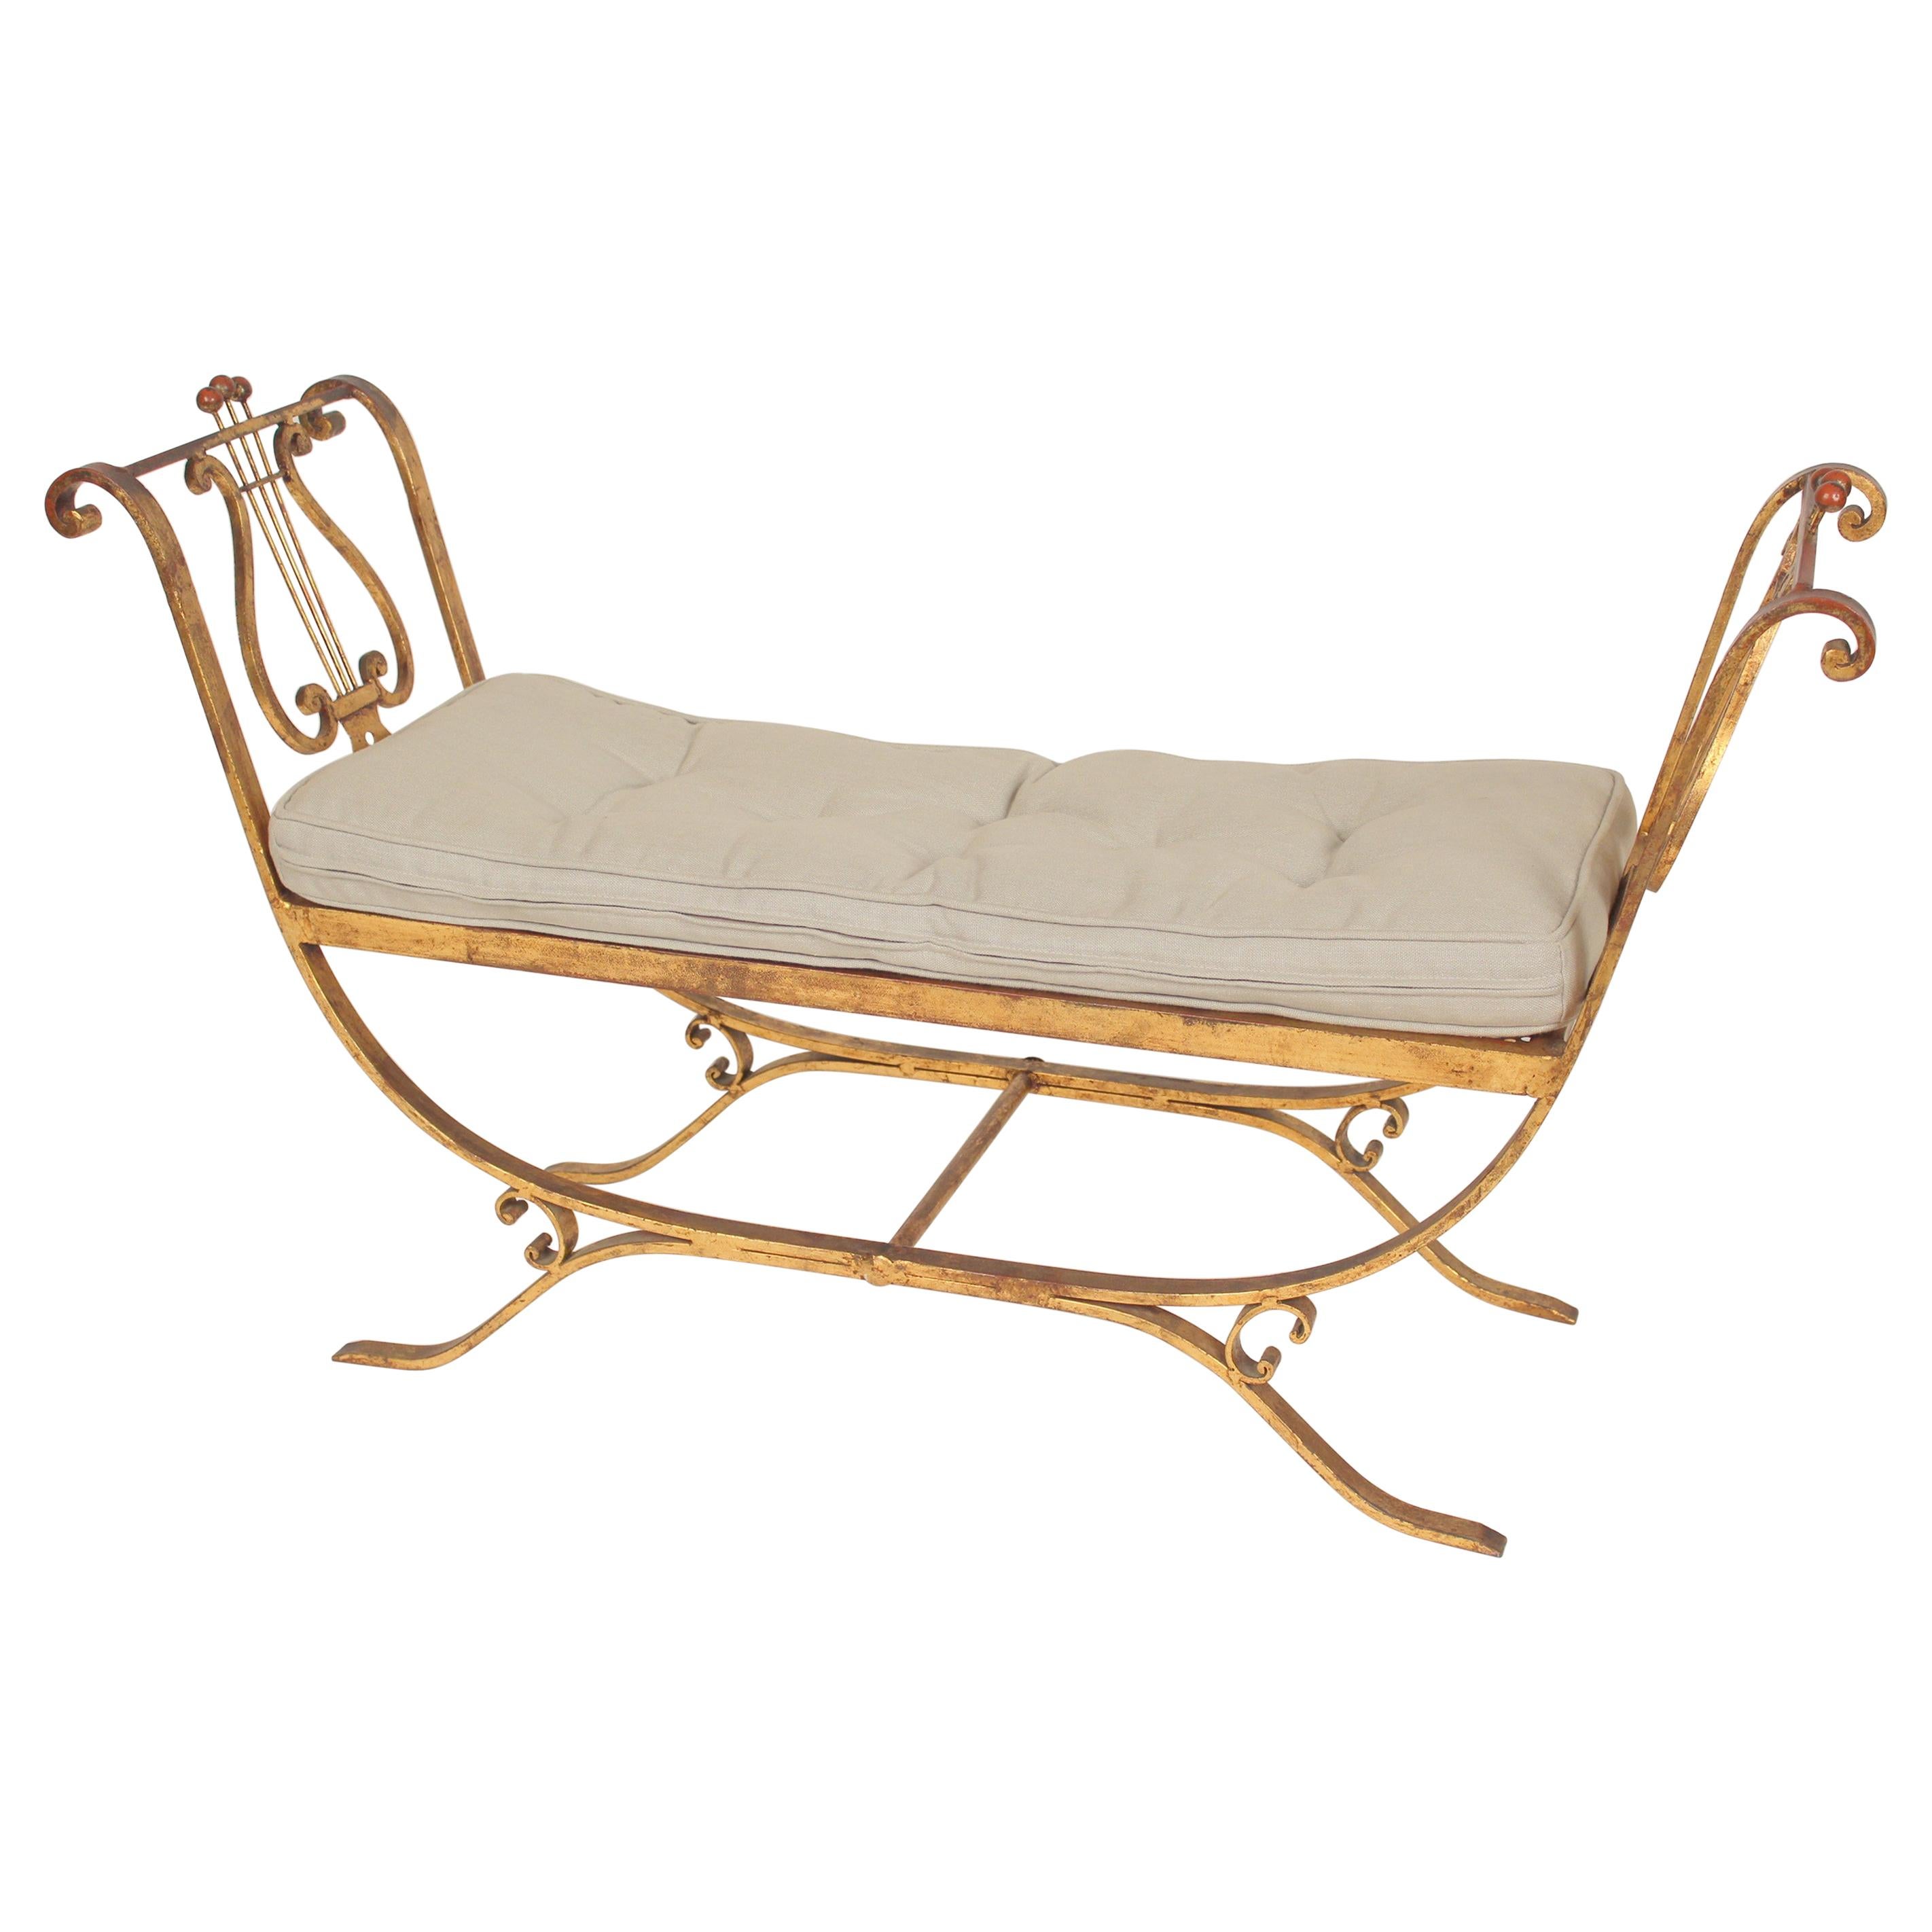 Neo Classical Style Gilt Iron Bench